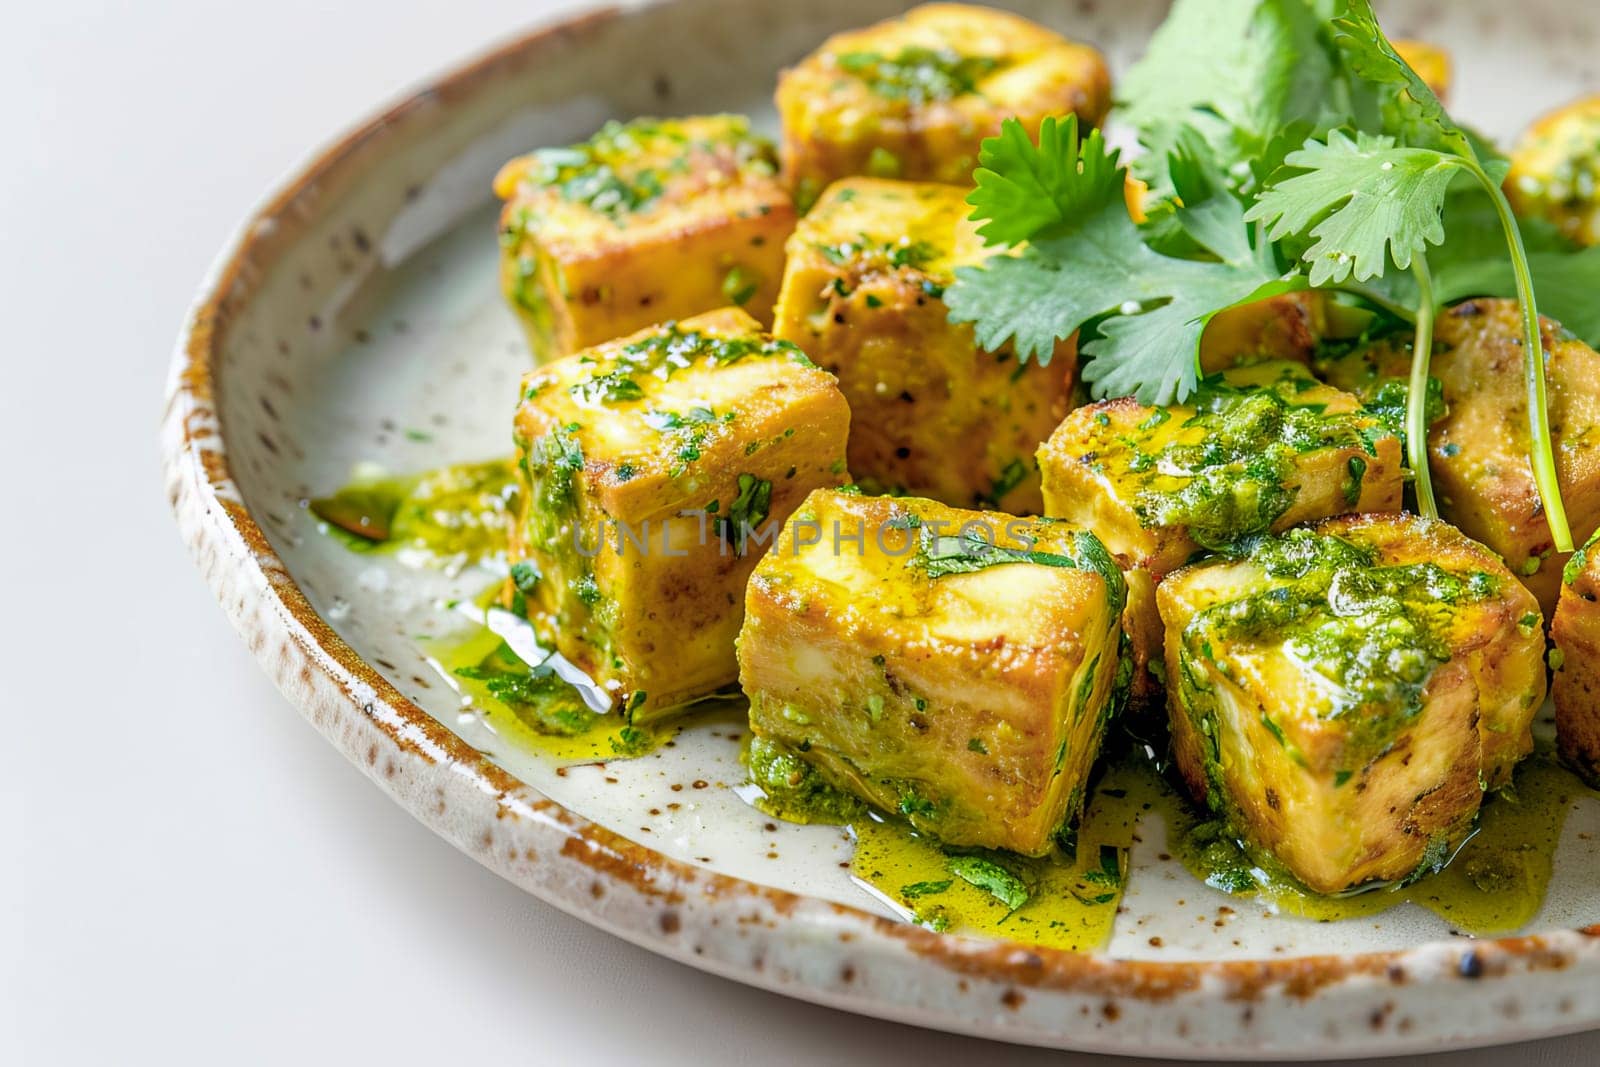 A dish of traditional Indian paneer cheese, diced and fried with spices, garnished with fresh cilantro and pesto on a ceramic plate. AI